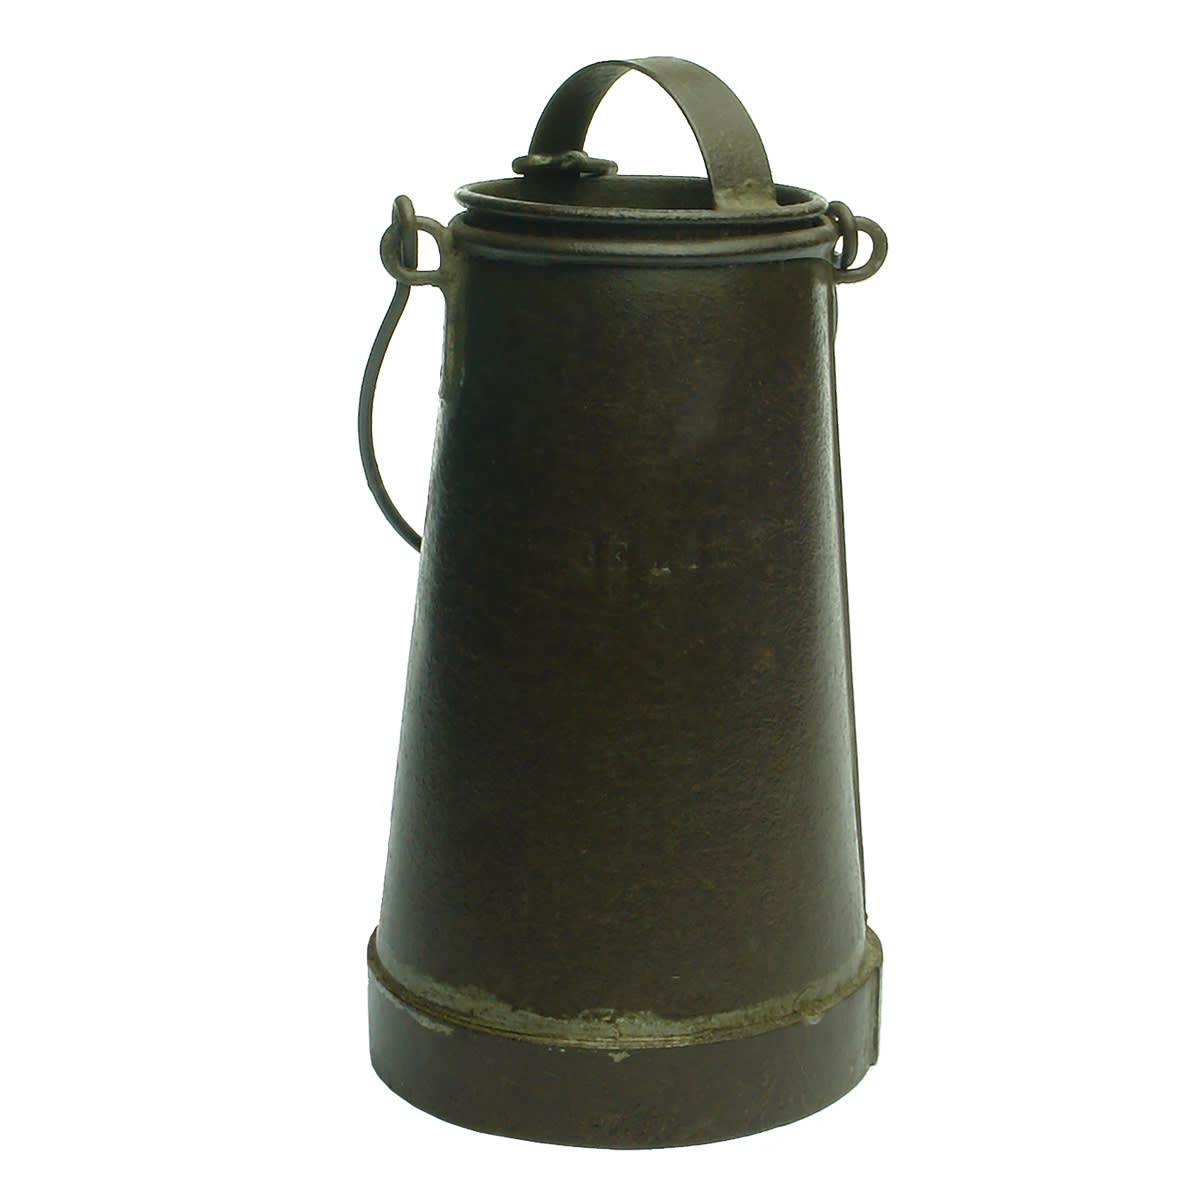 Conical tin container. Lid attached on a chain. Bellus impressed in the front of the container.